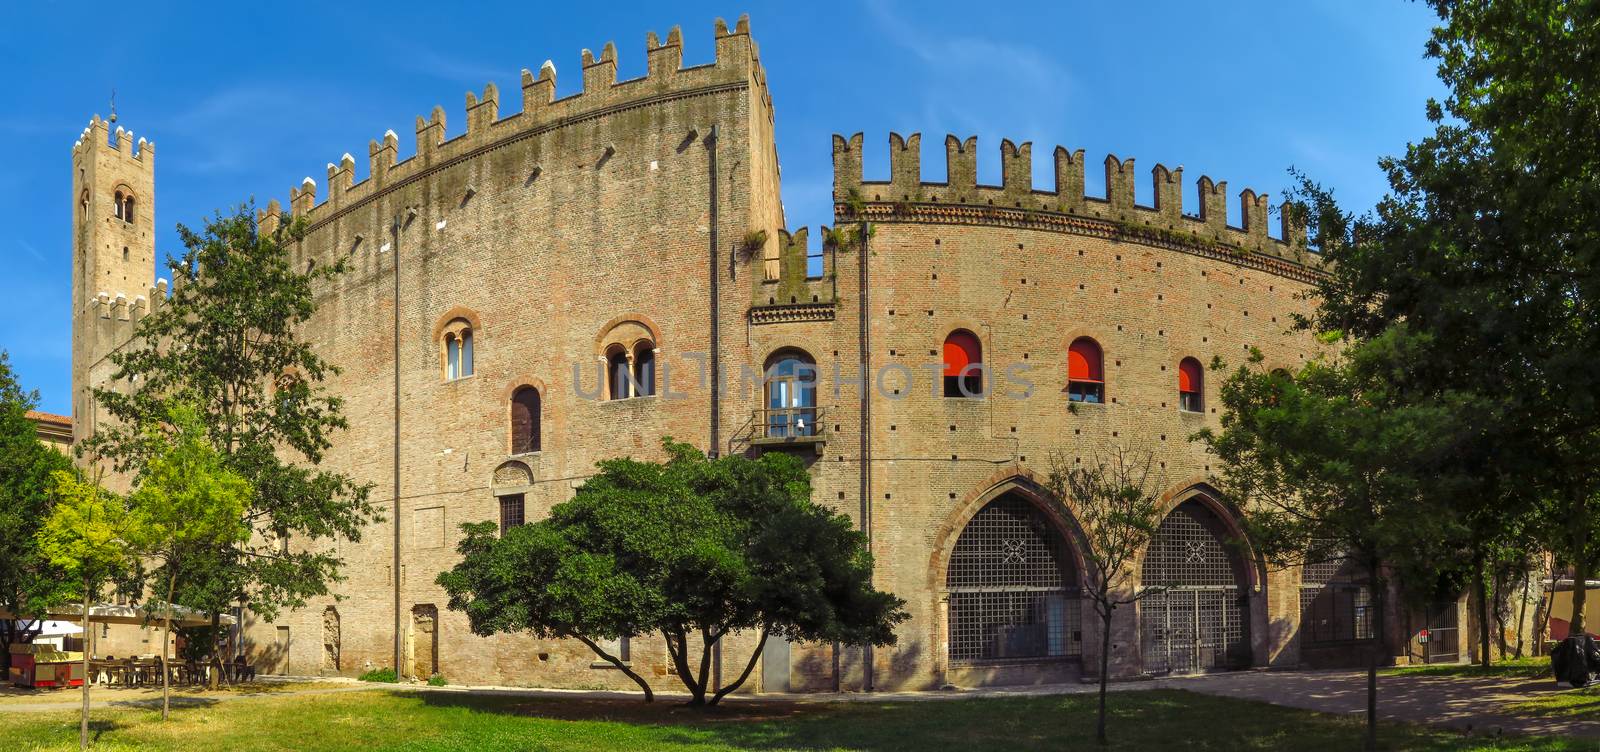 The majestic Palazzo dell'Arengo in Piazza Cavour. Built in the XIII century in Romanesque-Gothic style at the behest of the mayor of Rimini, it housed the Council of the Rimini people.